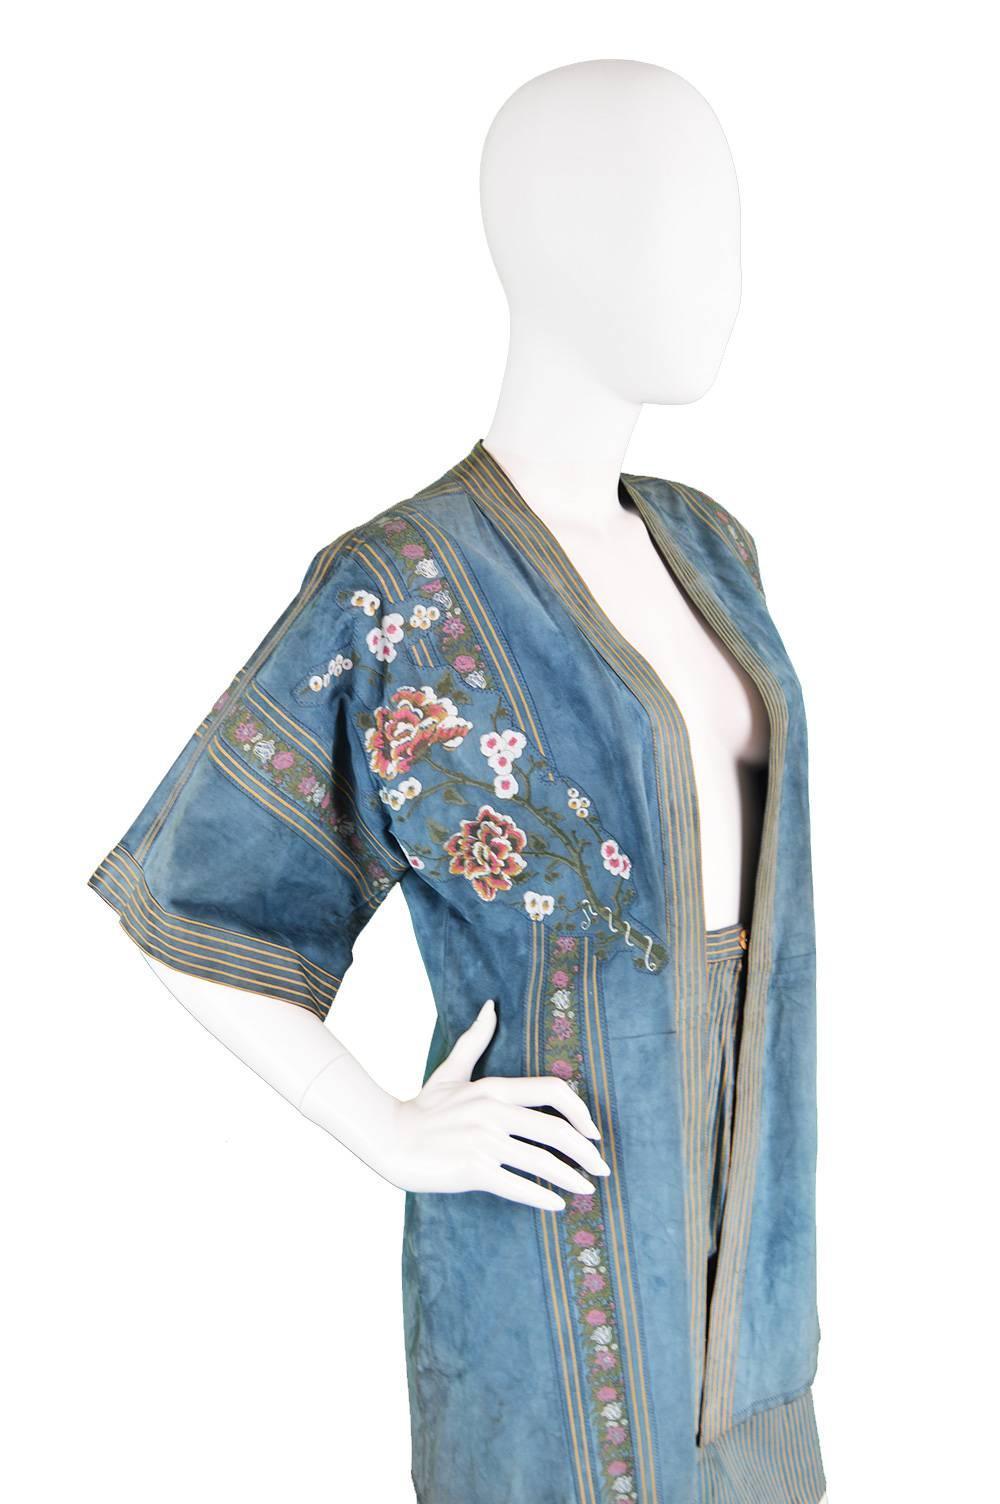 Roberto Cavalli 1970s Printed Blue Suede Oriental Jacket & Skirt Suit In Excellent Condition For Sale In Doncaster, South Yorkshire